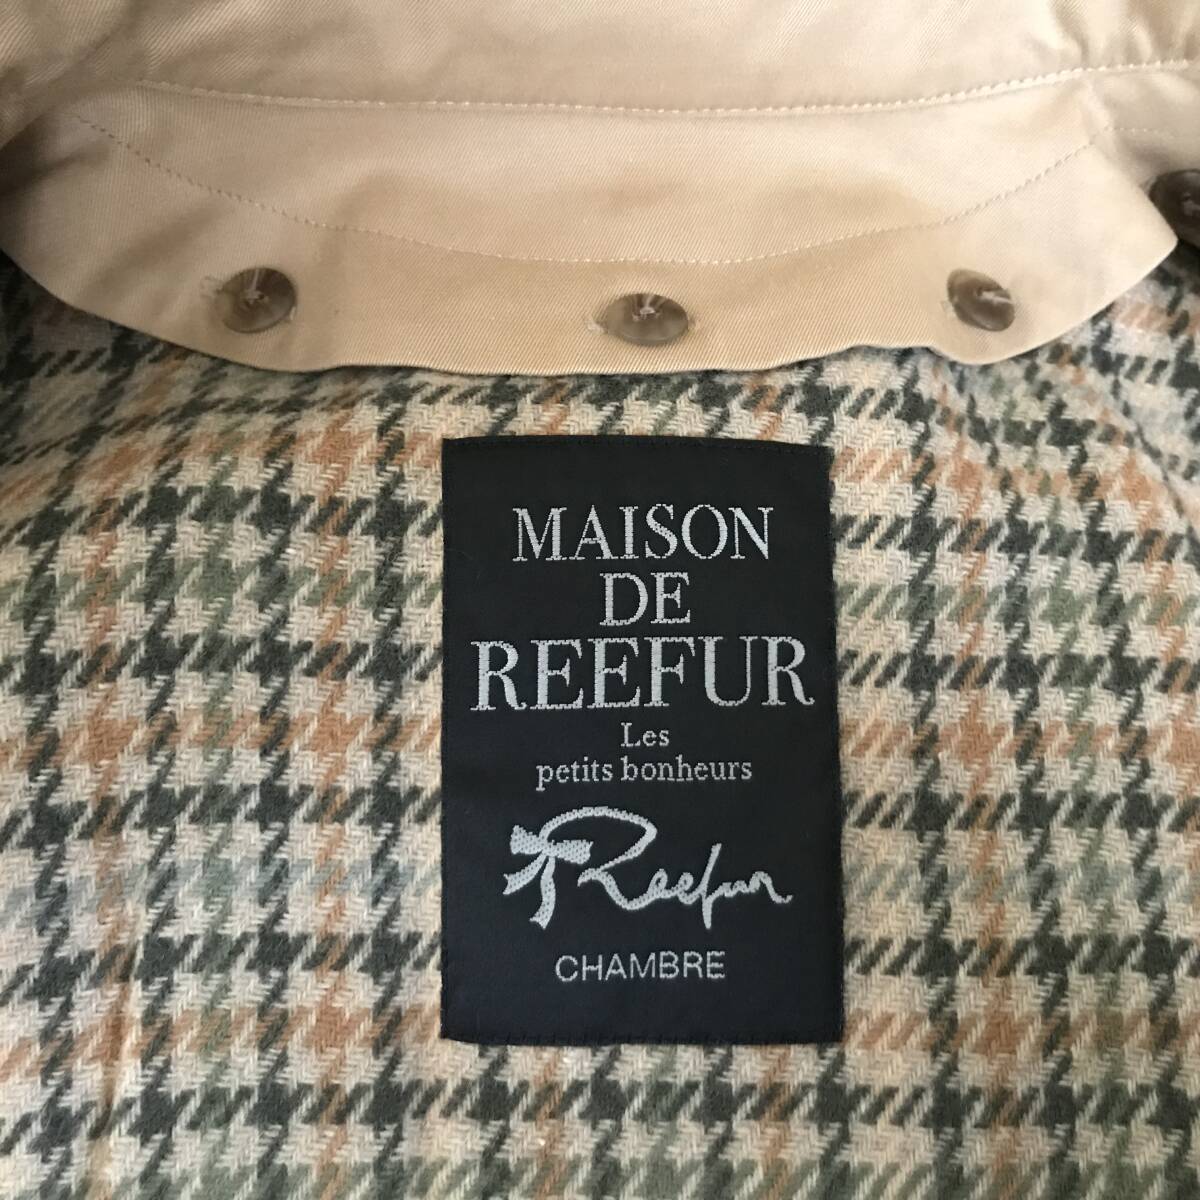 MAISON DE REEFUR mezzo ndo Lee fur lady's trench coat wool liner attaching beautiful goods ( almost not yet have on ) size 36